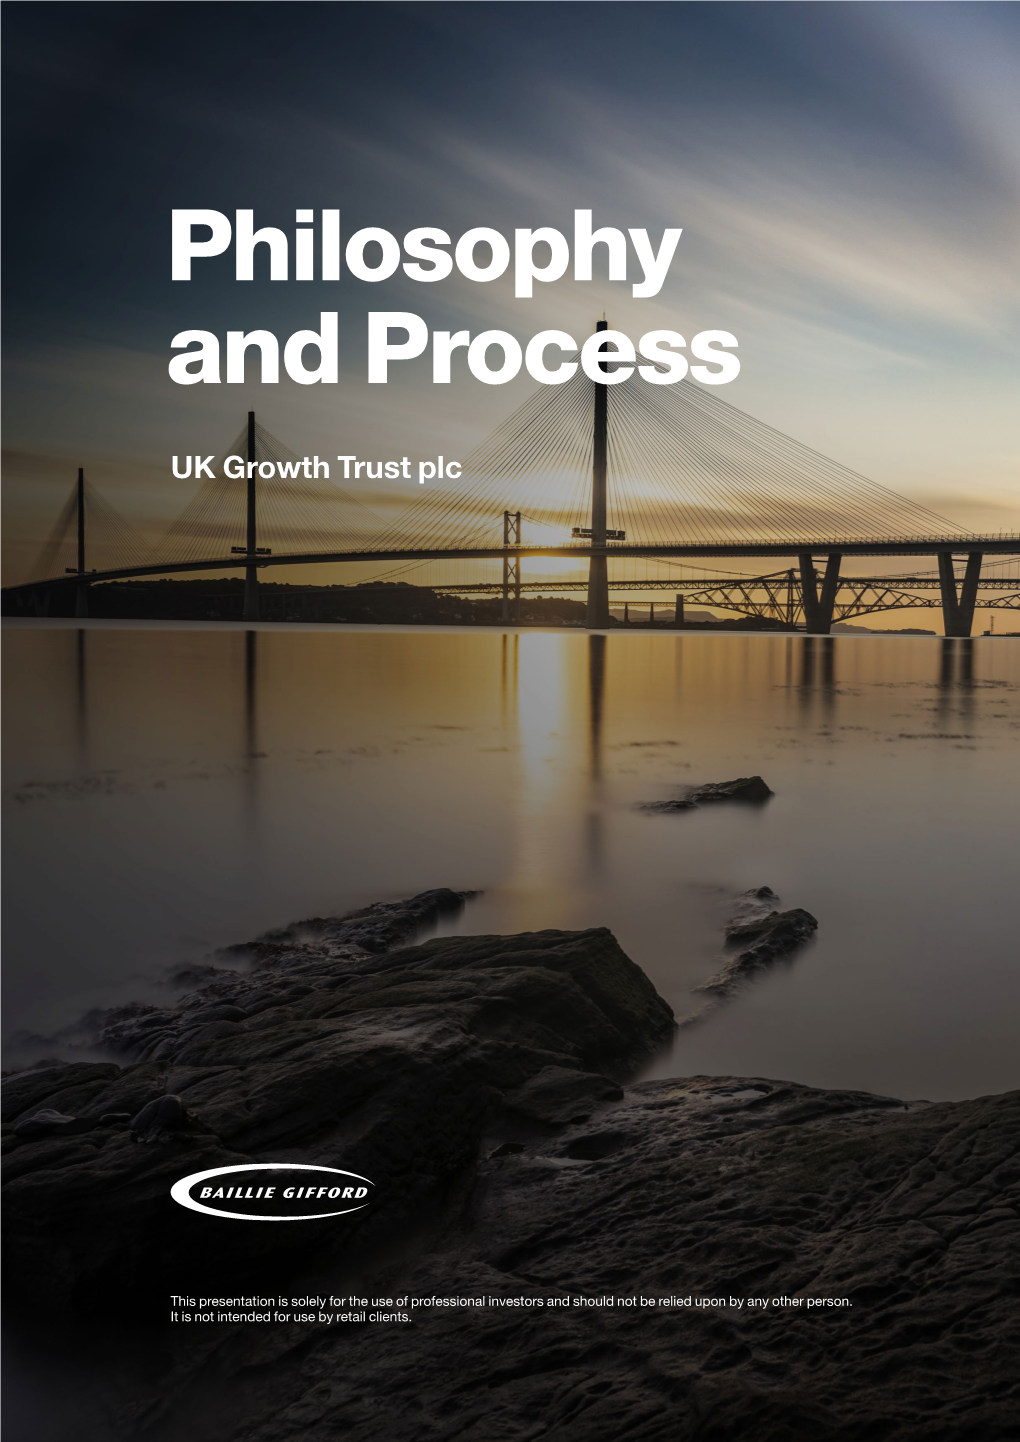 Baillie Gifford UK Growth Trust Philosophy and Process